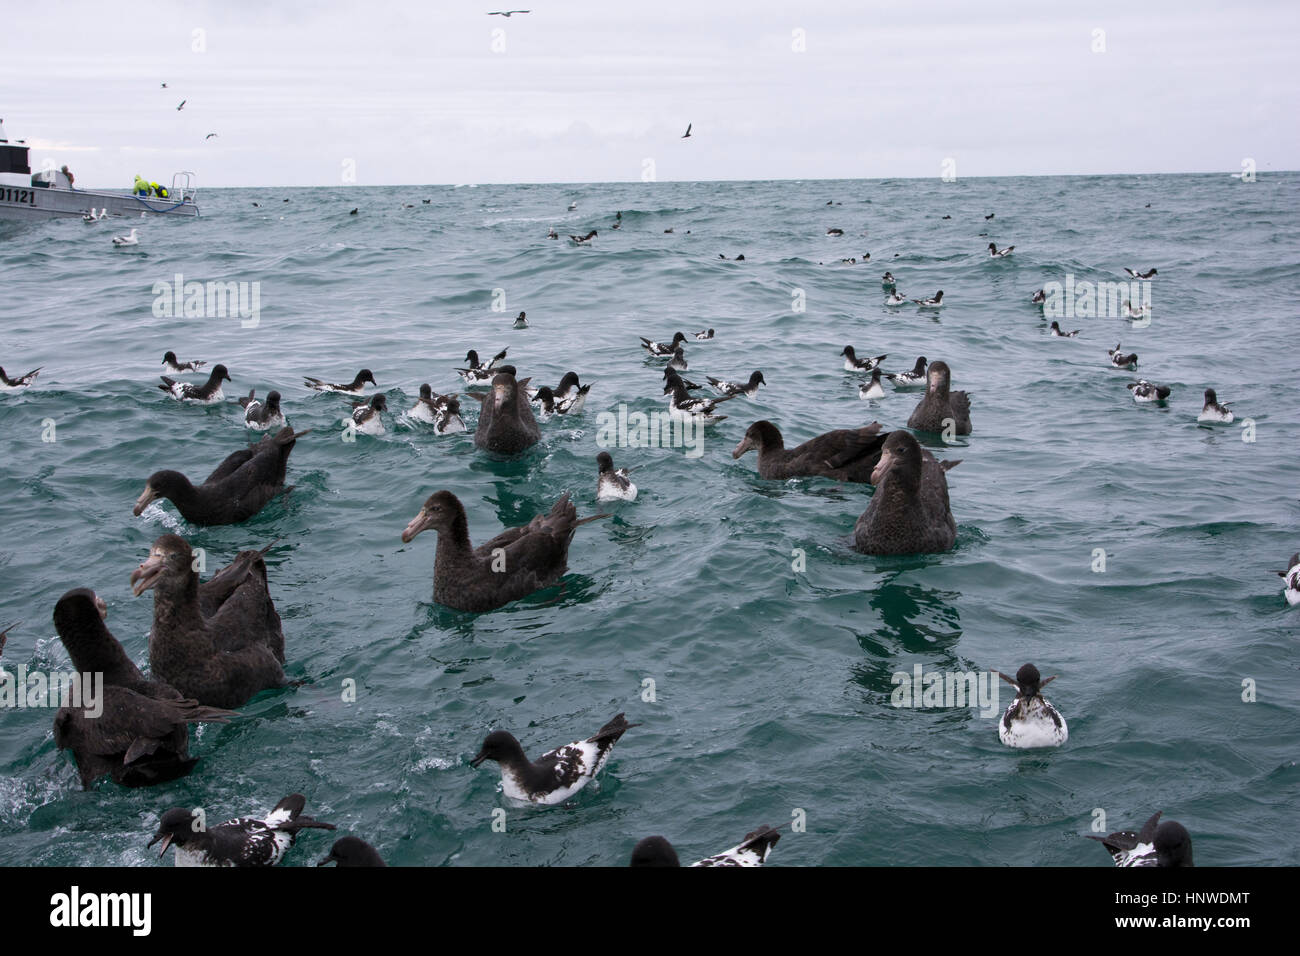 Northern Giant Petrels looking for fish liver which birdwatchers from Albatross Encounter throw over board to attract sea birds on the Pacific Ocean. Stock Photo